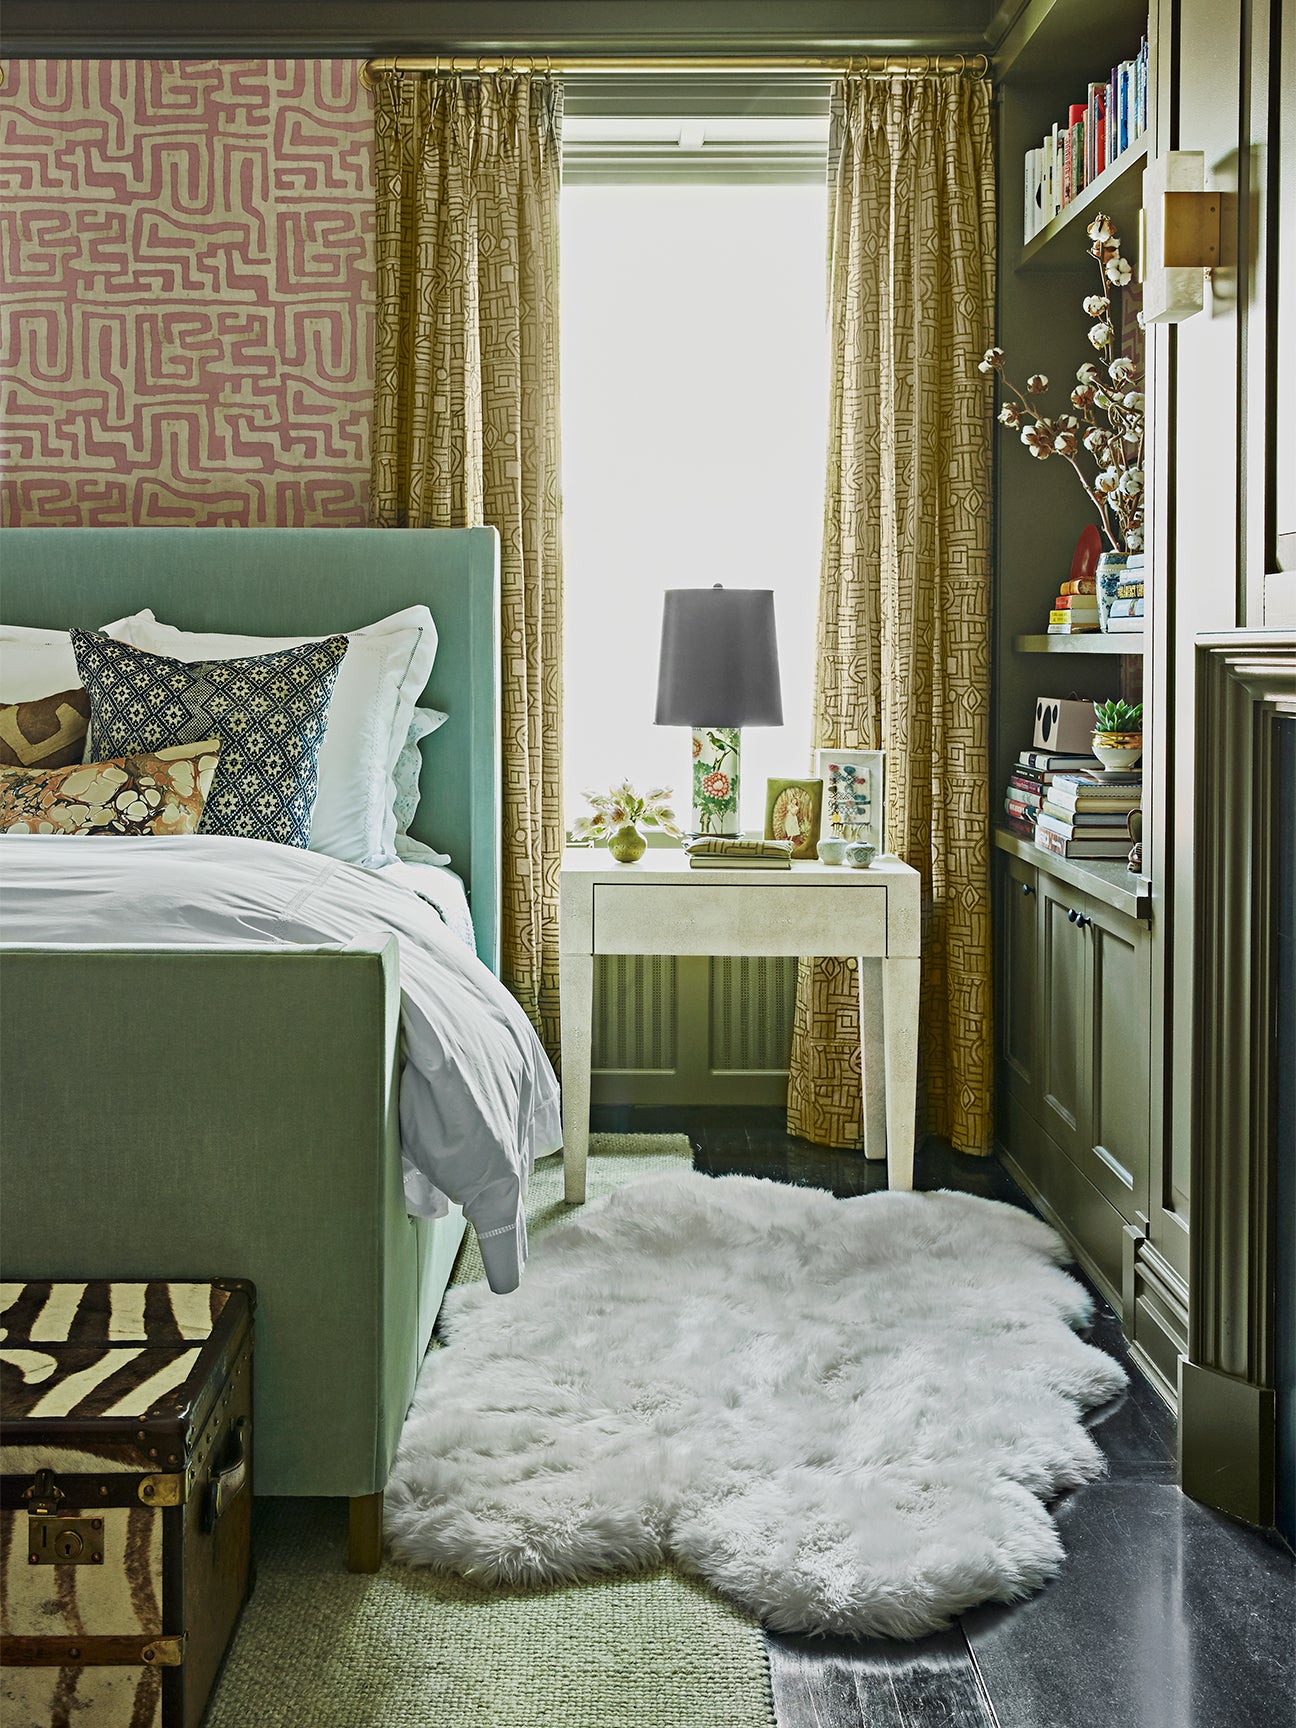 Green Bedroom With White Sheepskin Rug